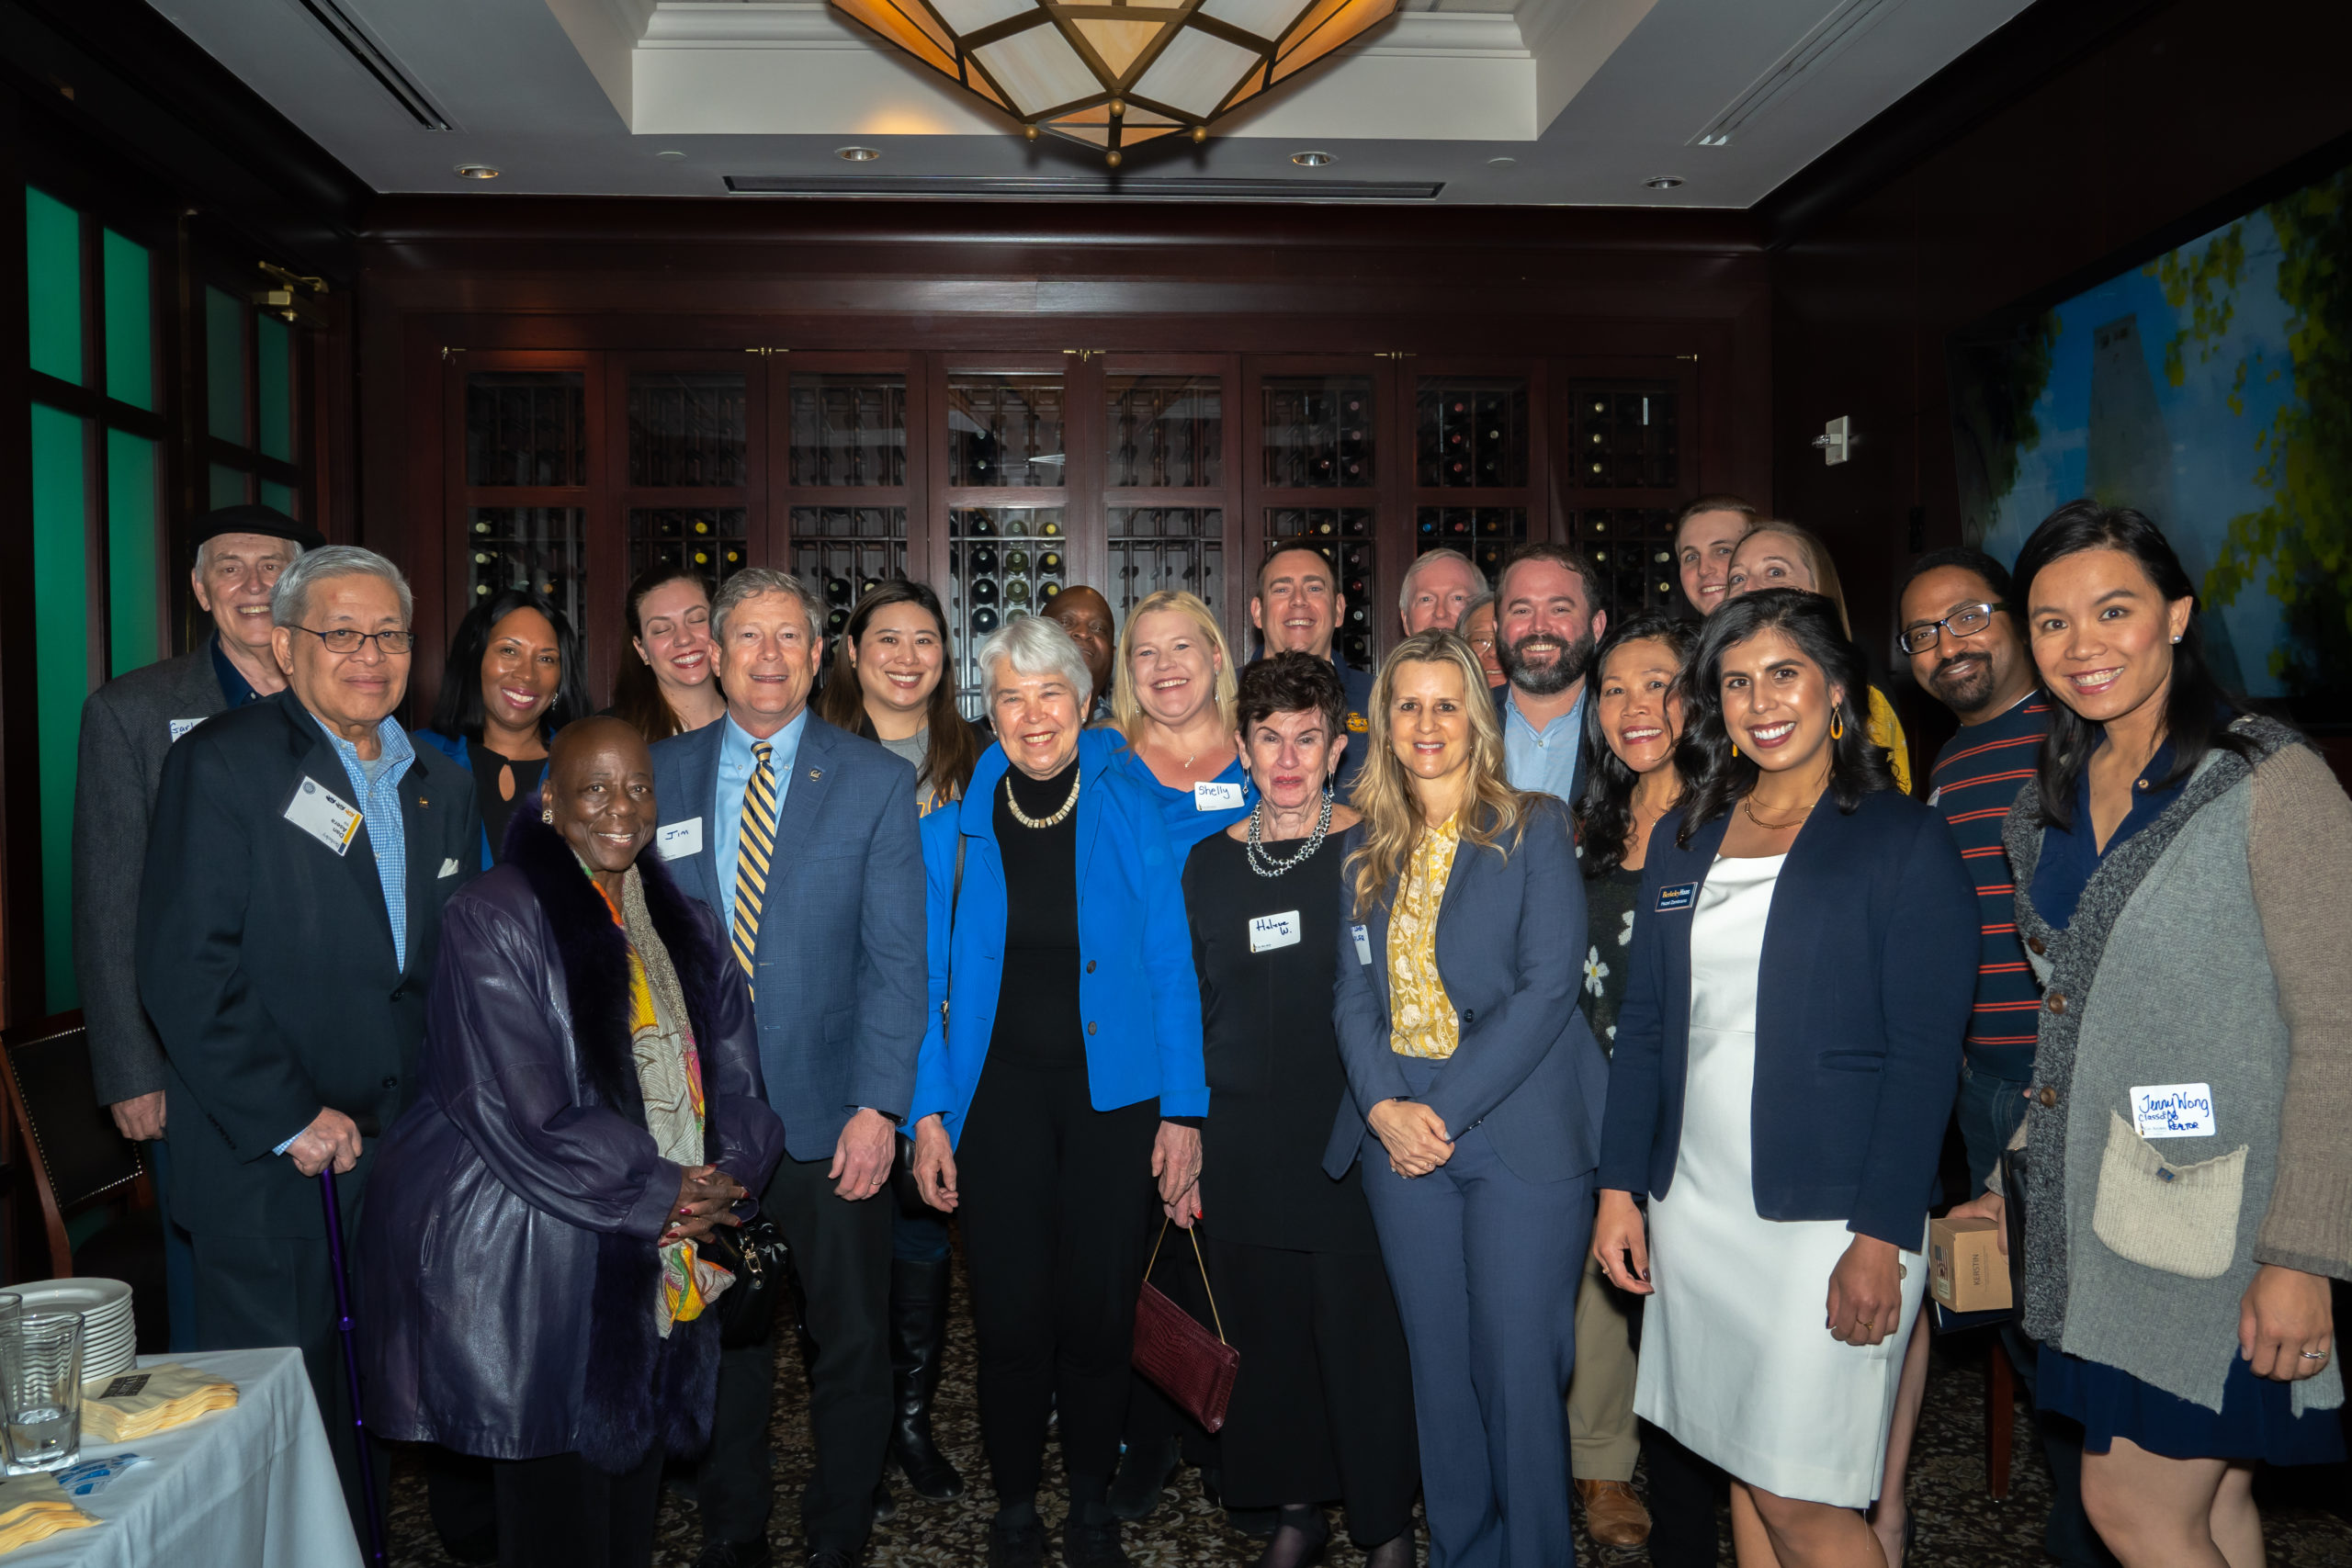 Pictures (see link below) – Las Vegas Reception for Berkeley Chancellor on 3-11-22